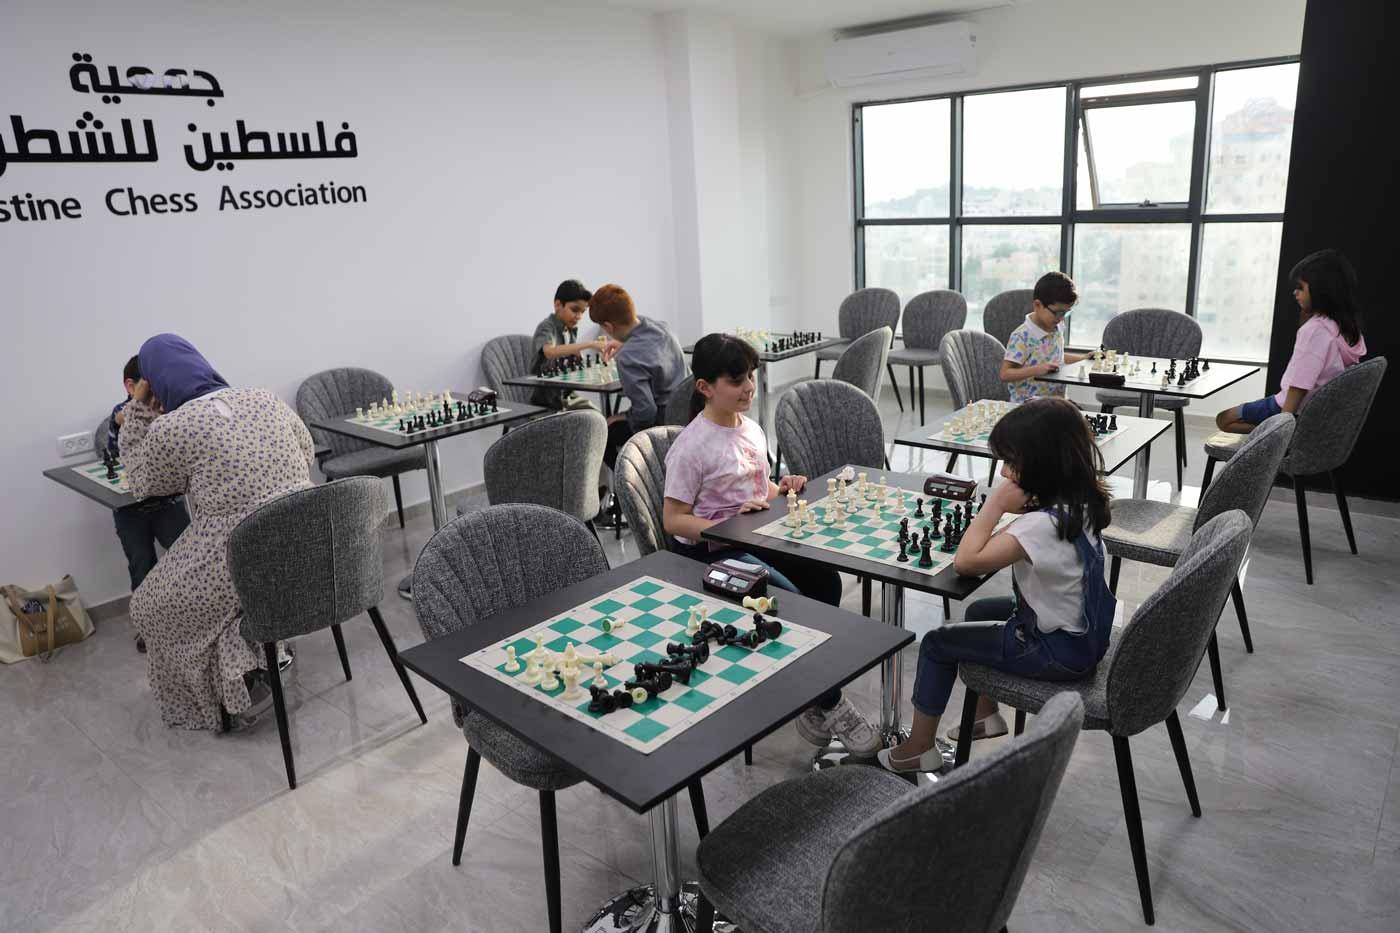 Royal Company inaugurates the headquarters of the Palestine Chess Association in Hebron 